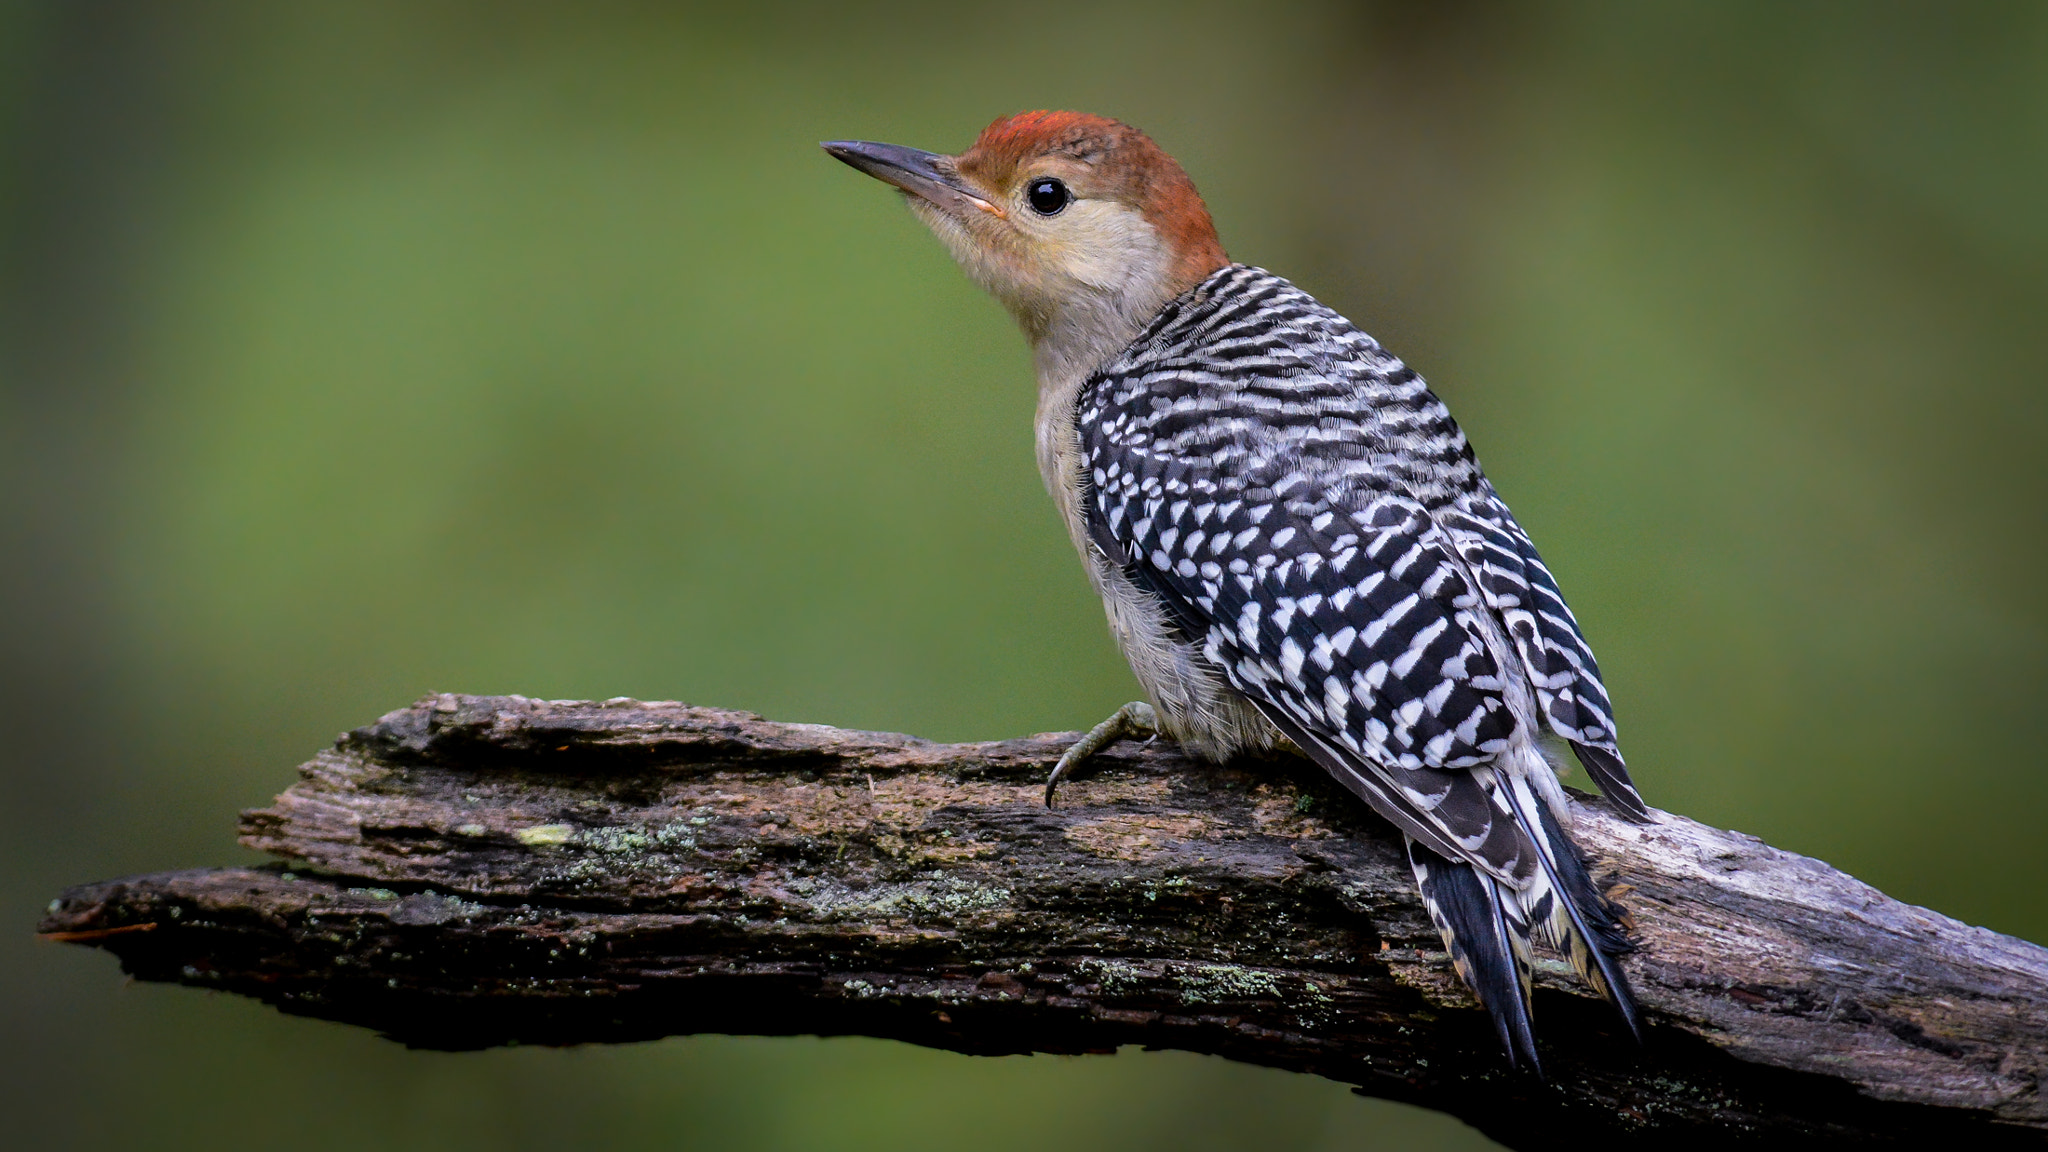 Nikon D7100 sample photo. Red-bellied woodpecker (juvenile) photography